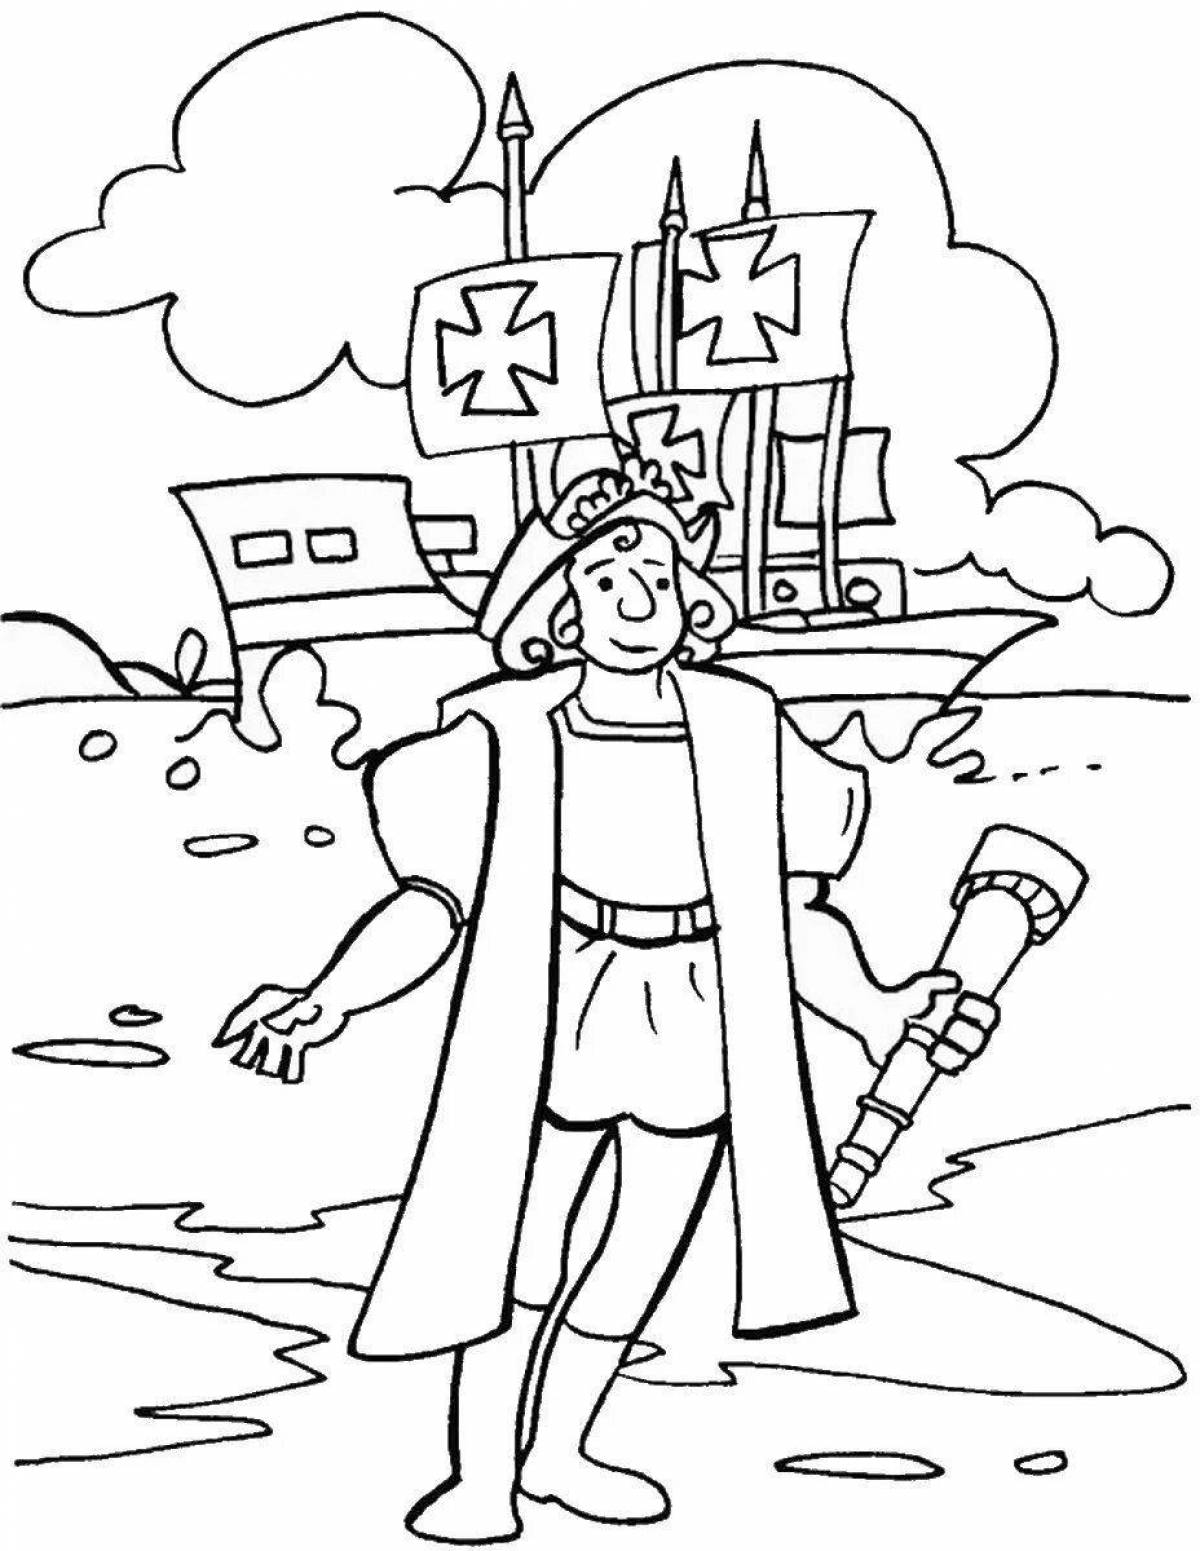 Wonderful peter the first coloring book for kids